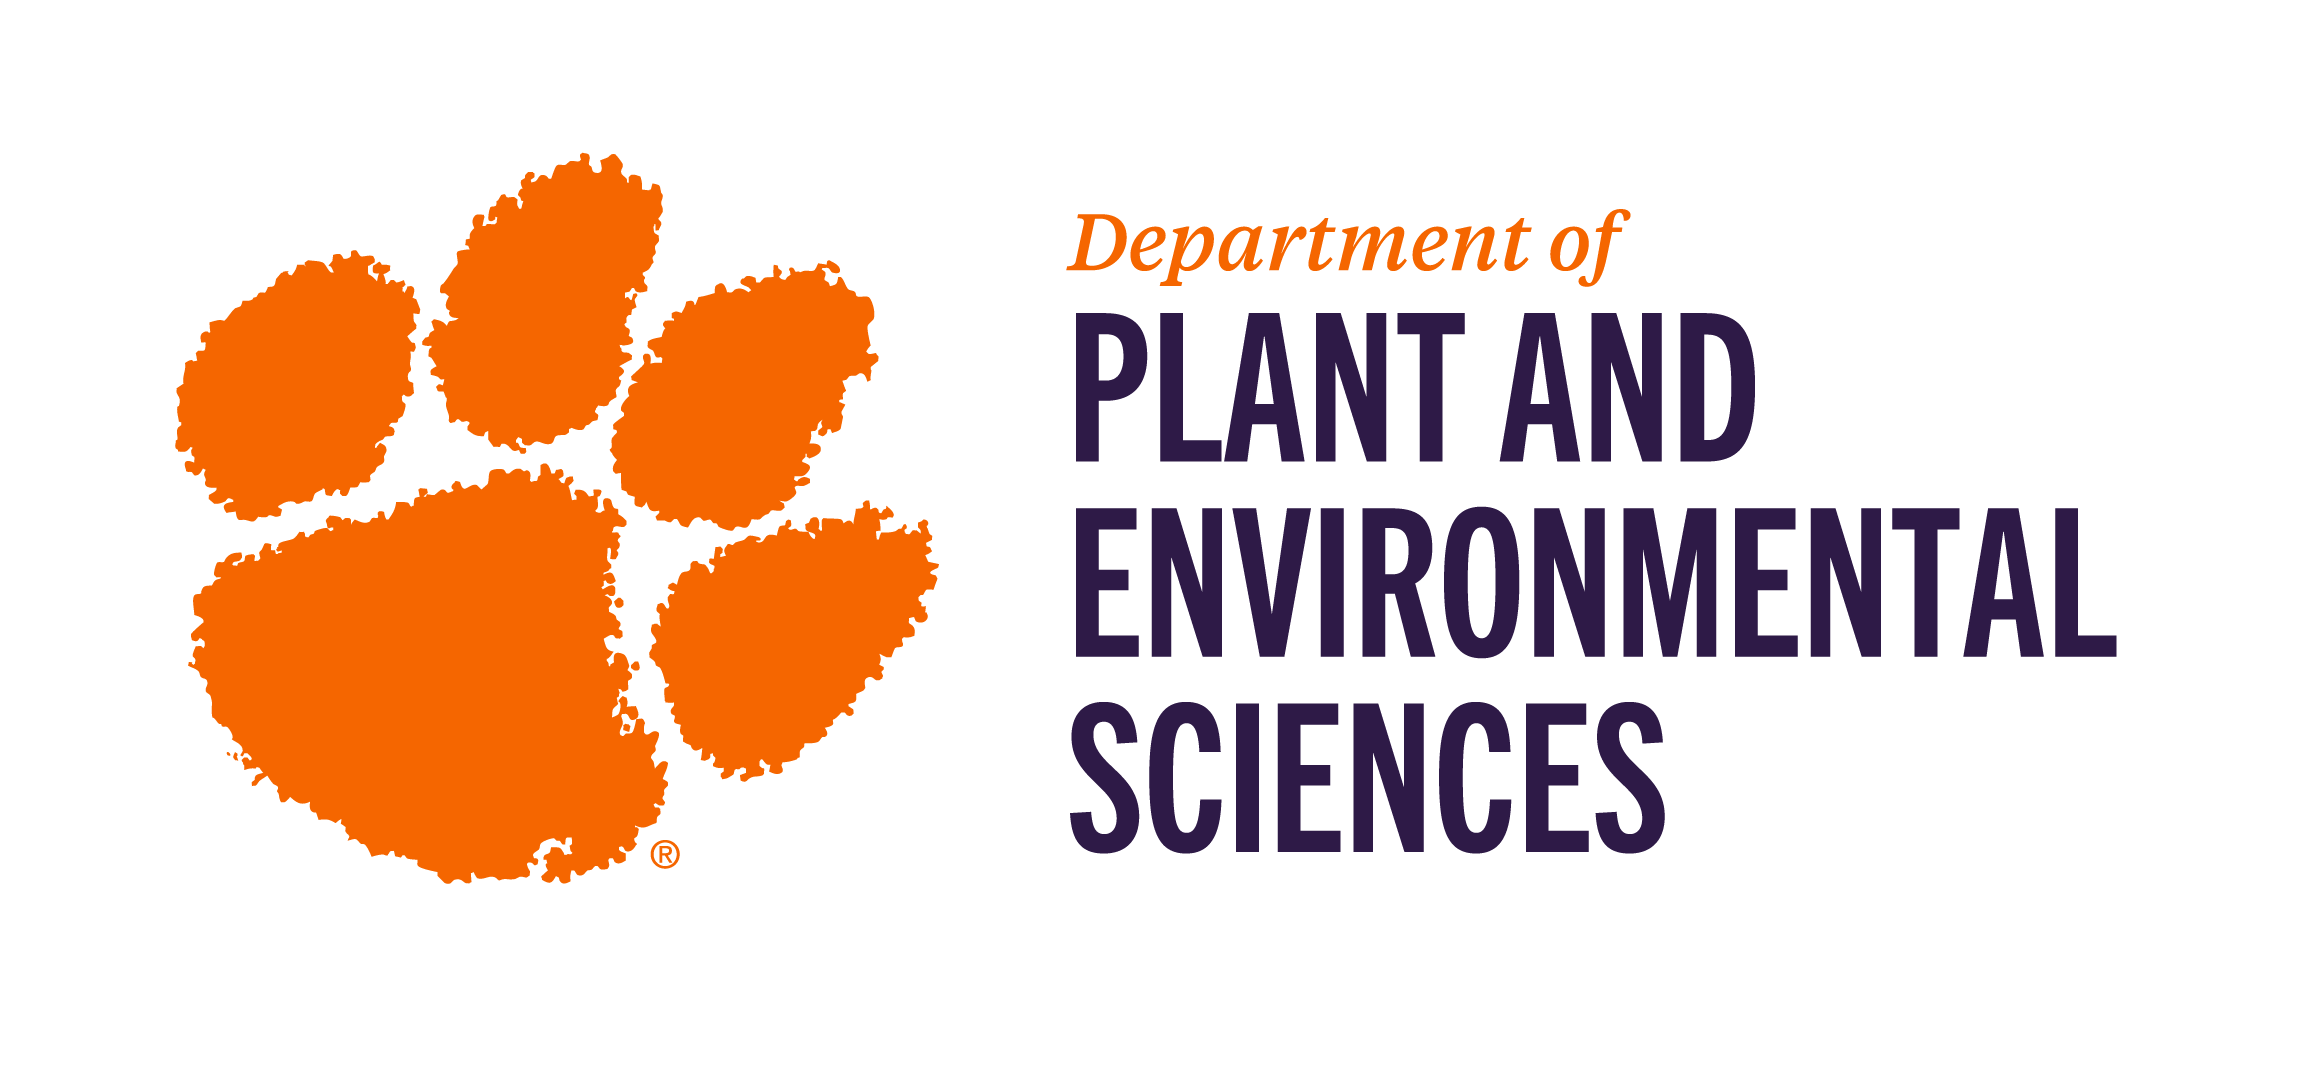 Department of Plant and Environmental Sciences logo